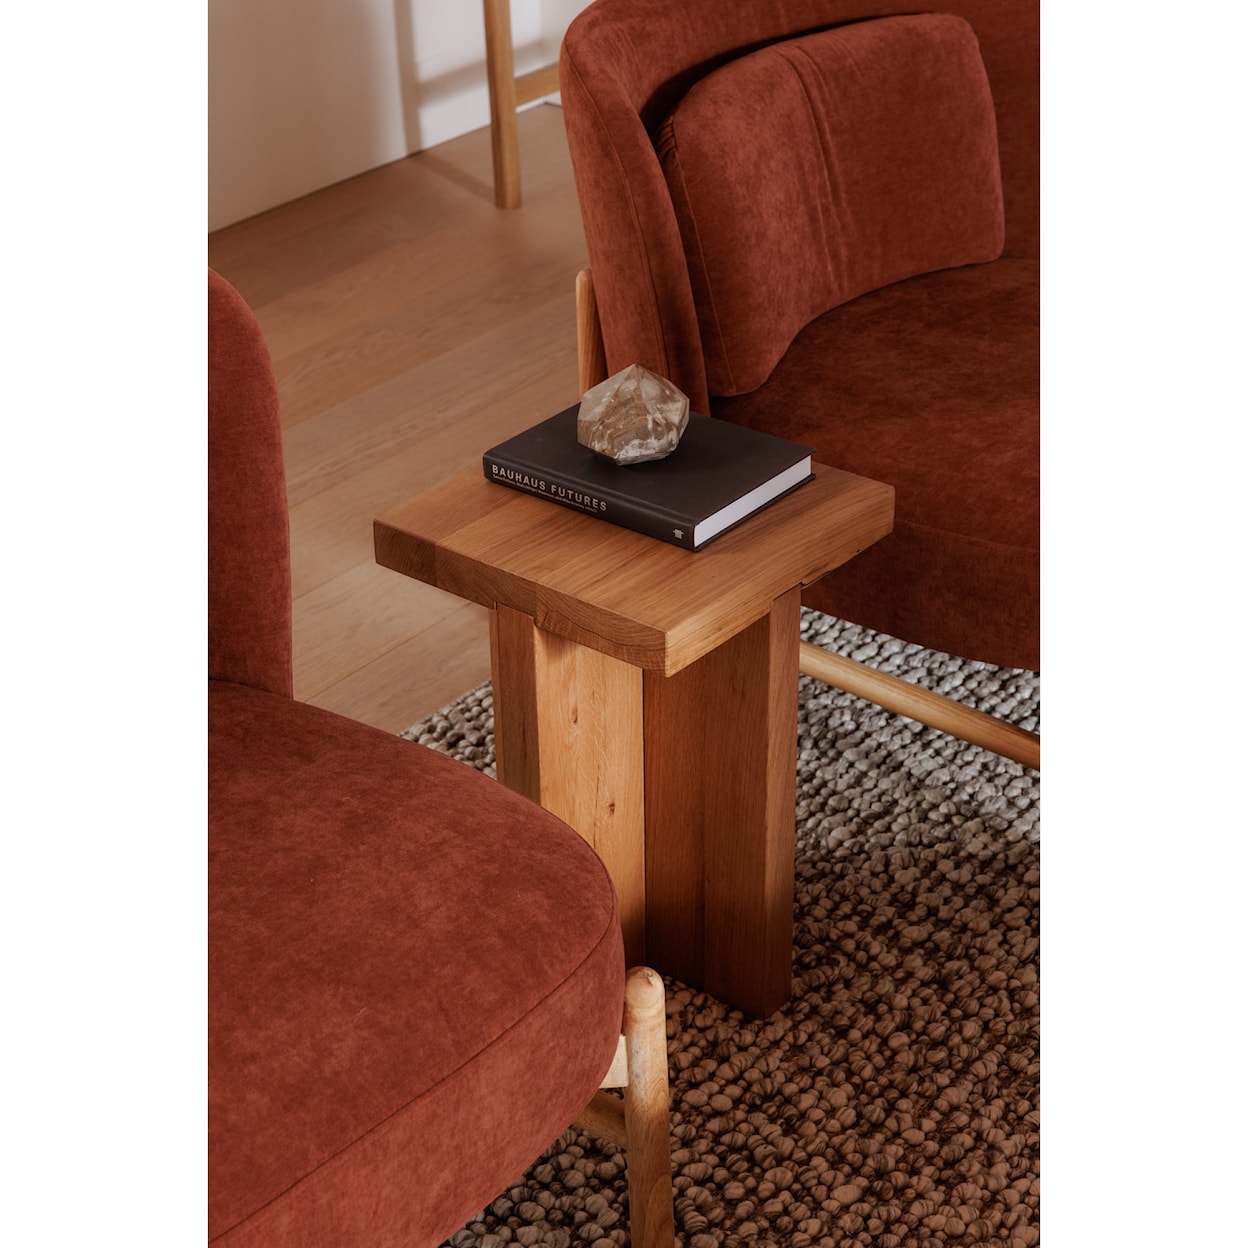 Moe's Home Collection Folke Side Table